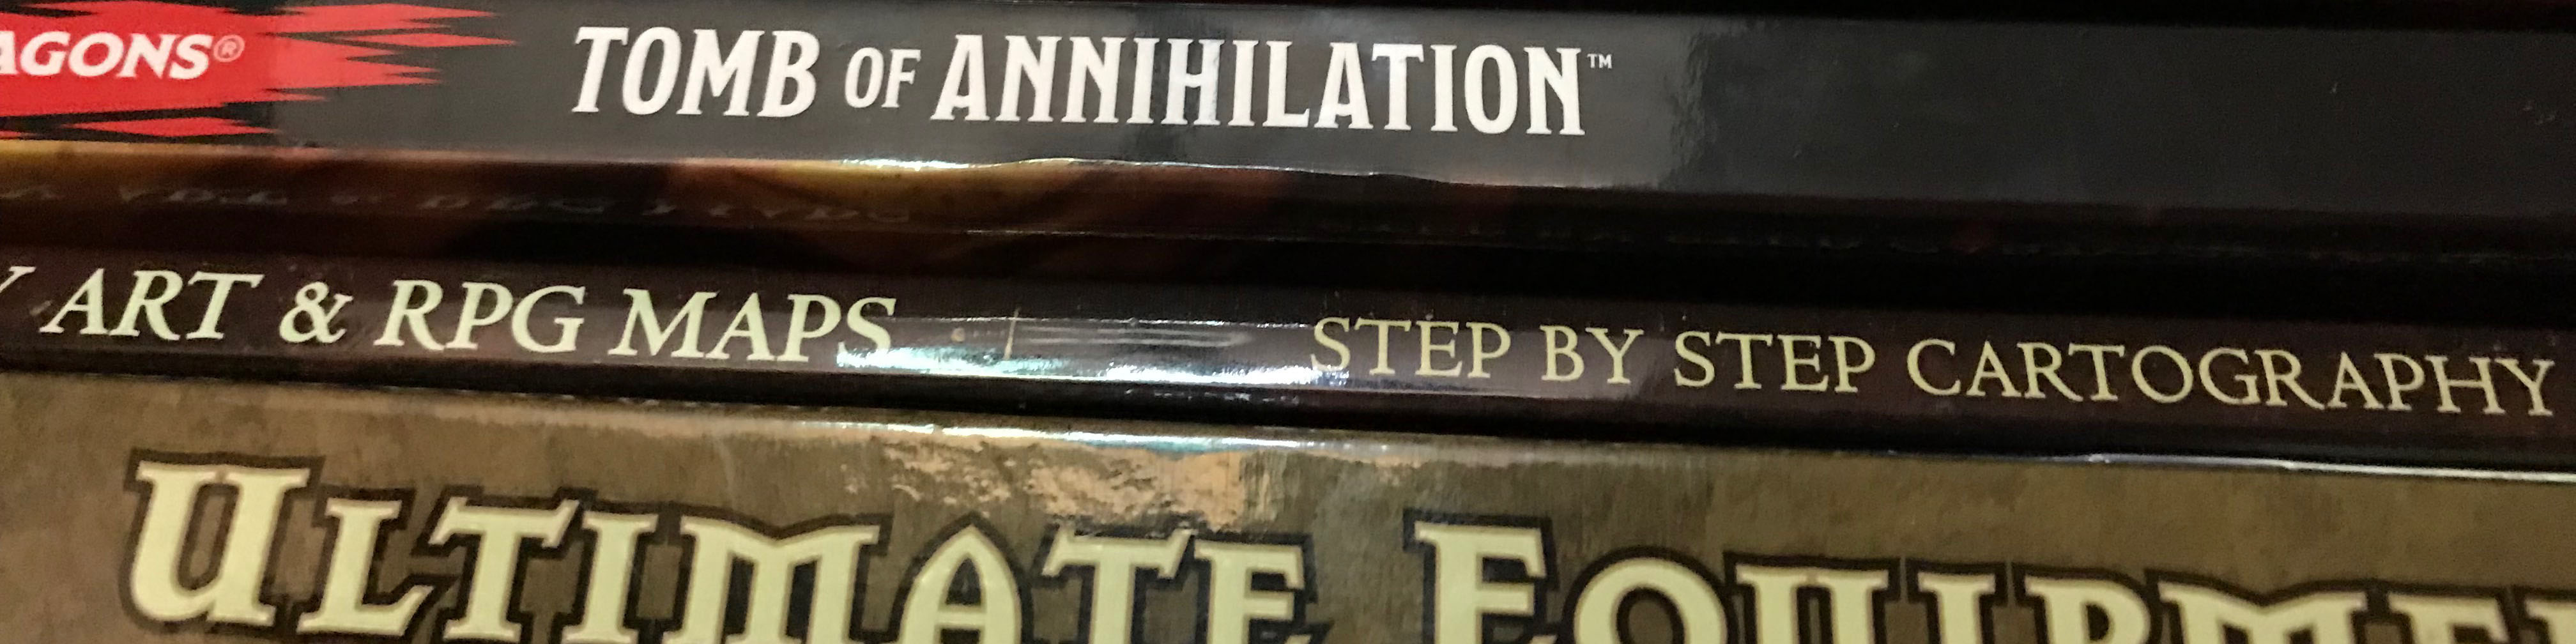 A stack of role-playing-game related books.